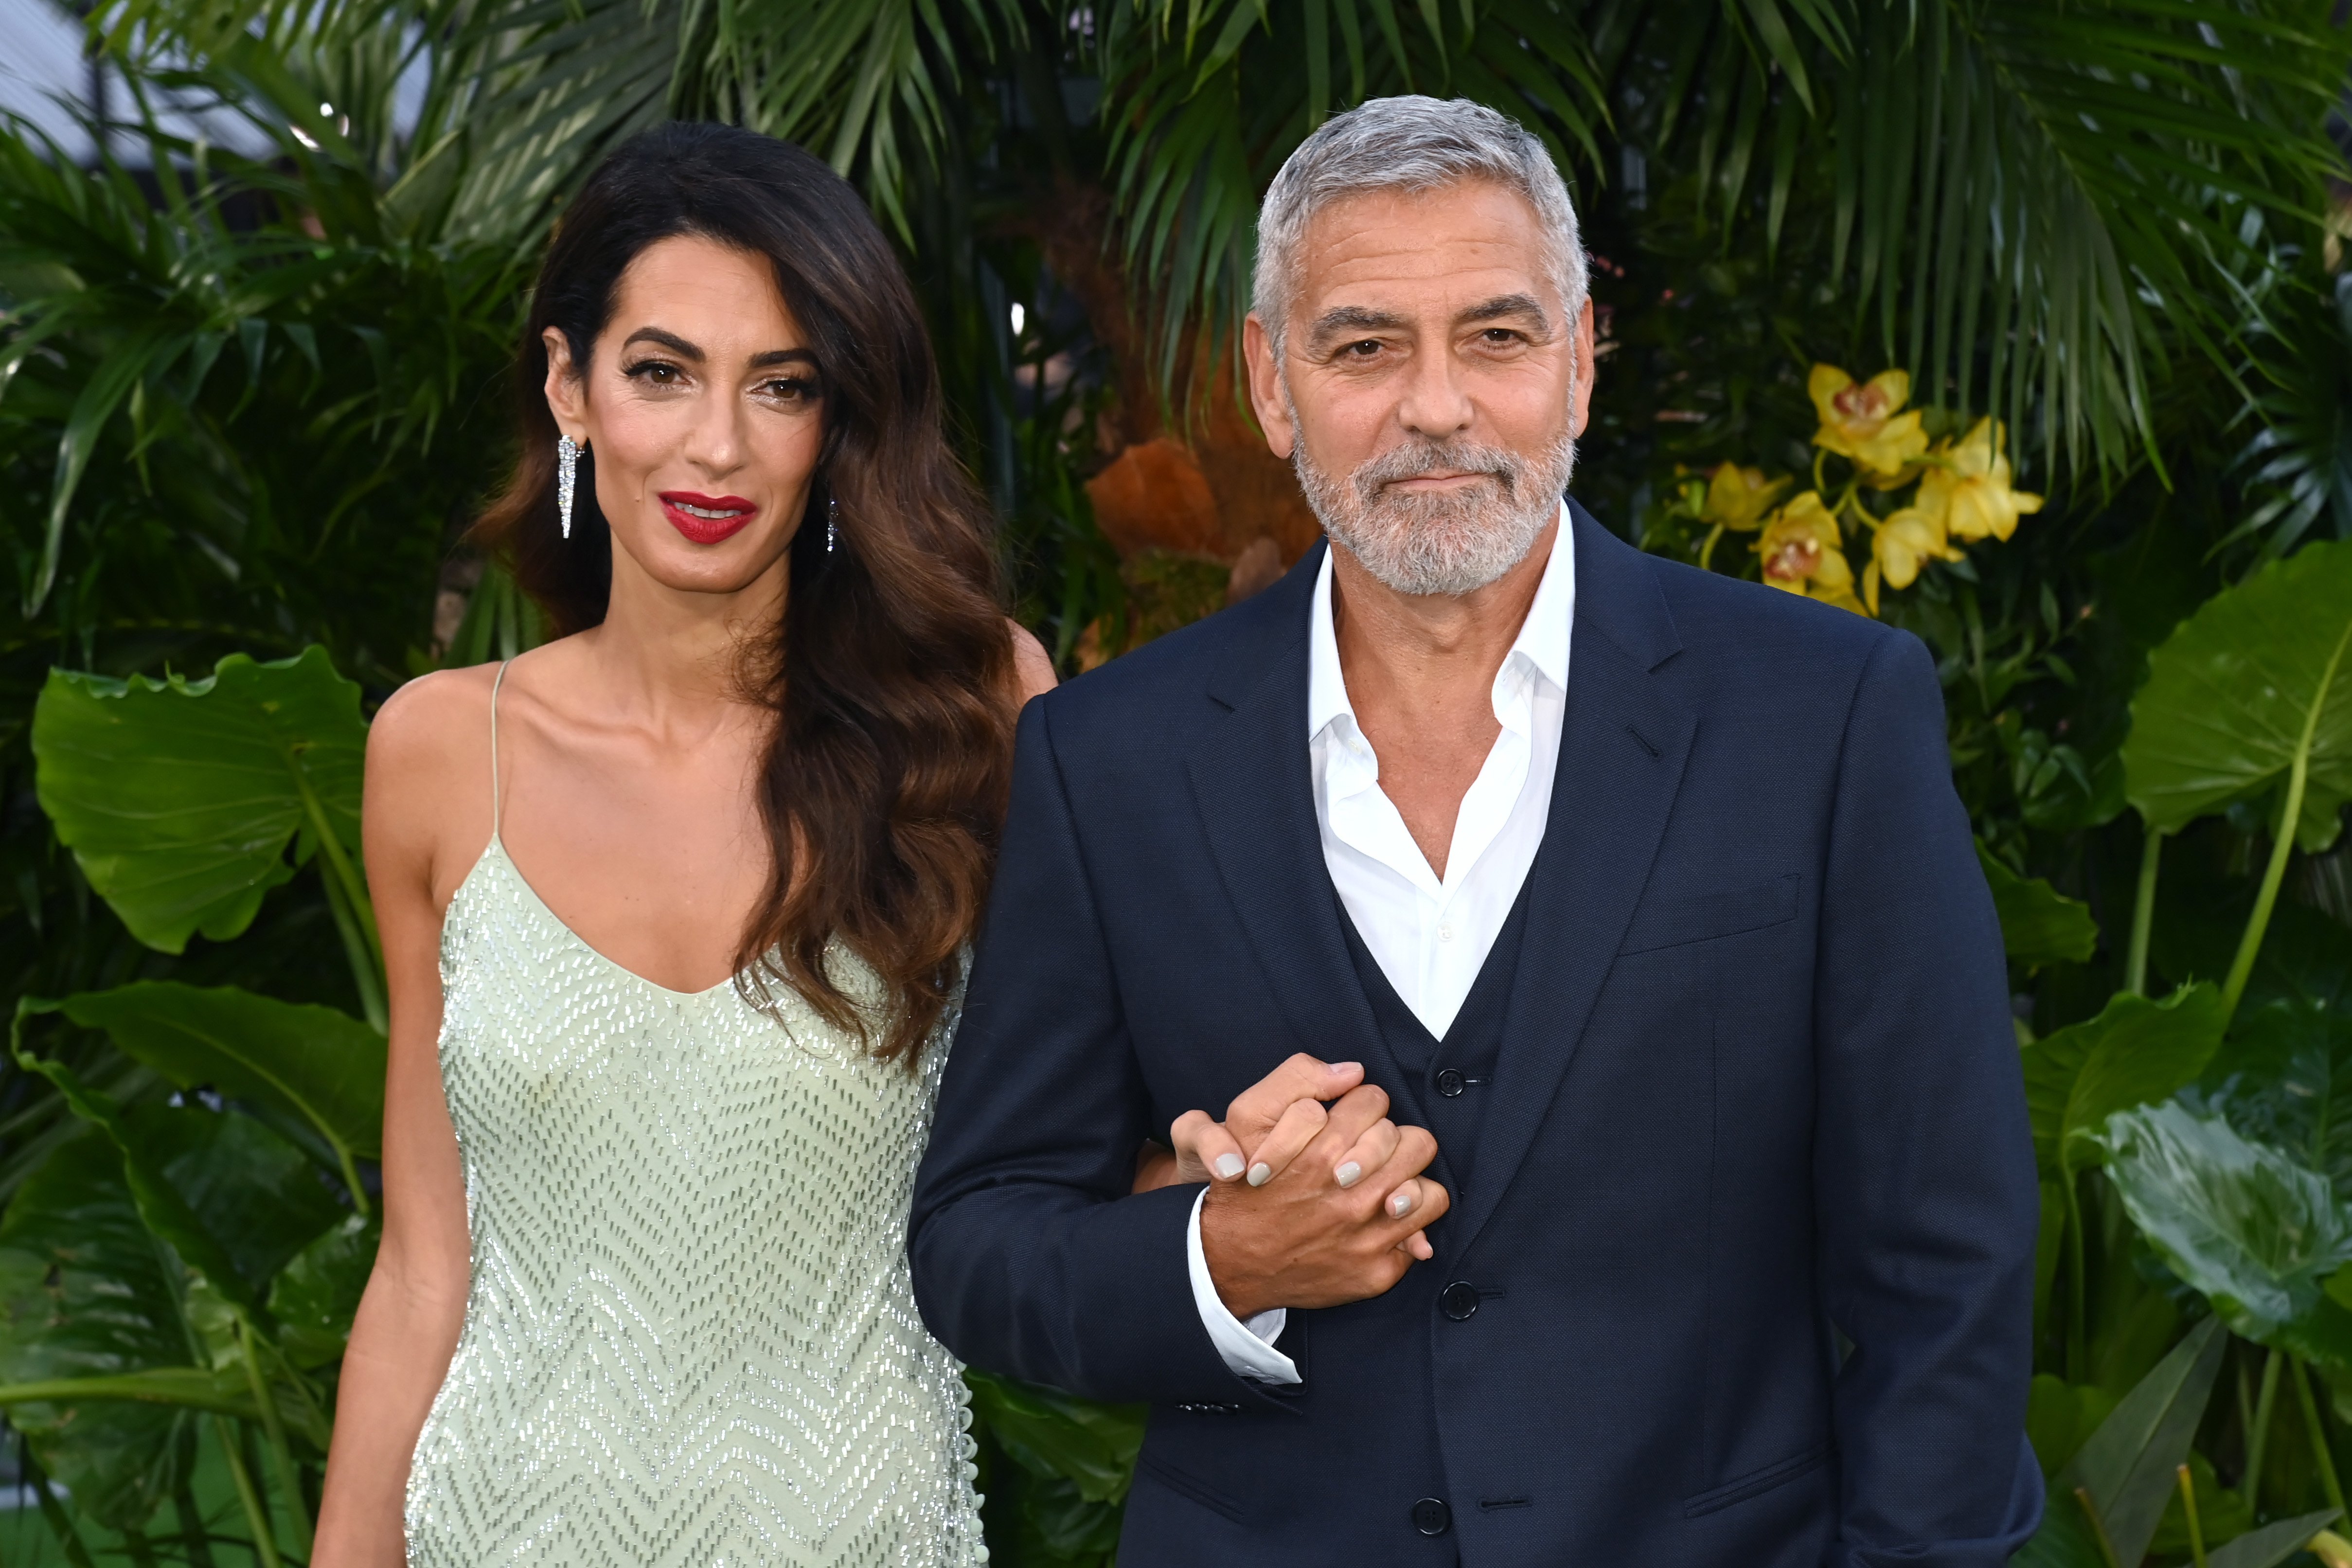 Amal Clooney and George Clooney attend the "Ticket To Paradise" World Film Premiere at Odeon Luxe Leicester Square on September 07, 2022 in London, England | Source: Getty Images